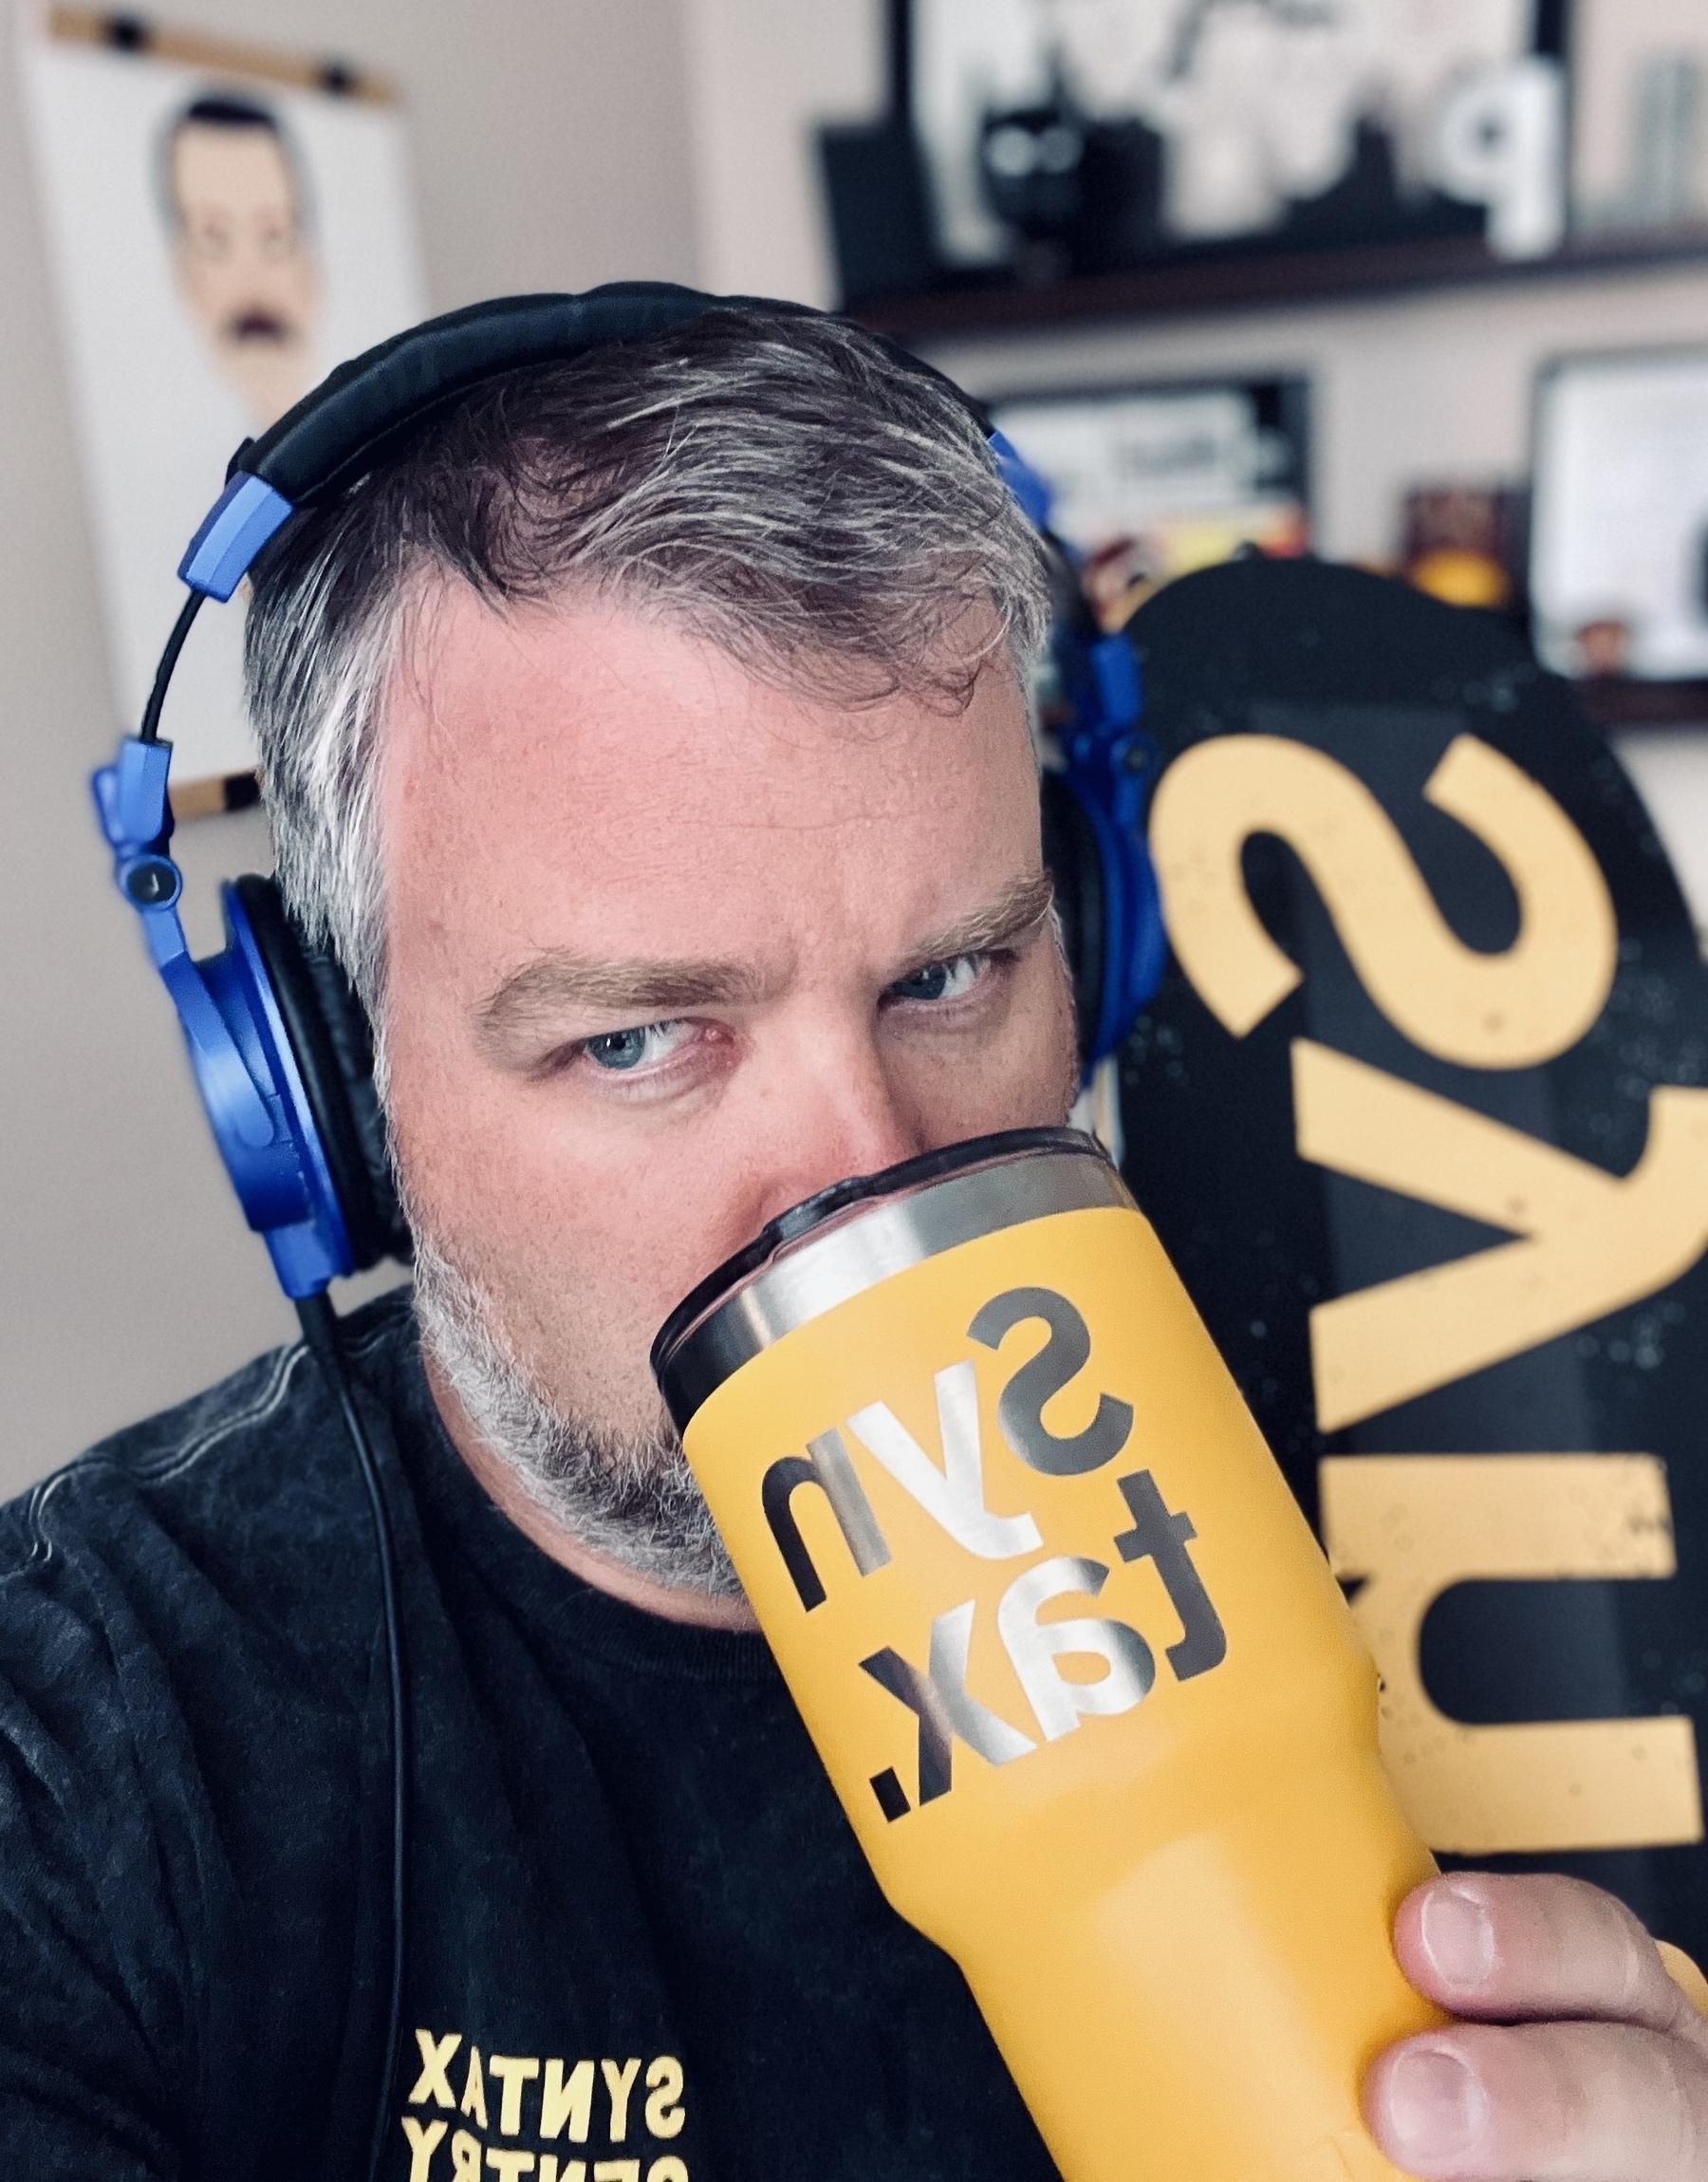 An adult male (me) holding a Yeti mug with Syntax branding, wearing headphones, holding a Syntax skate deck, and wearing a Syntax tshirt. 